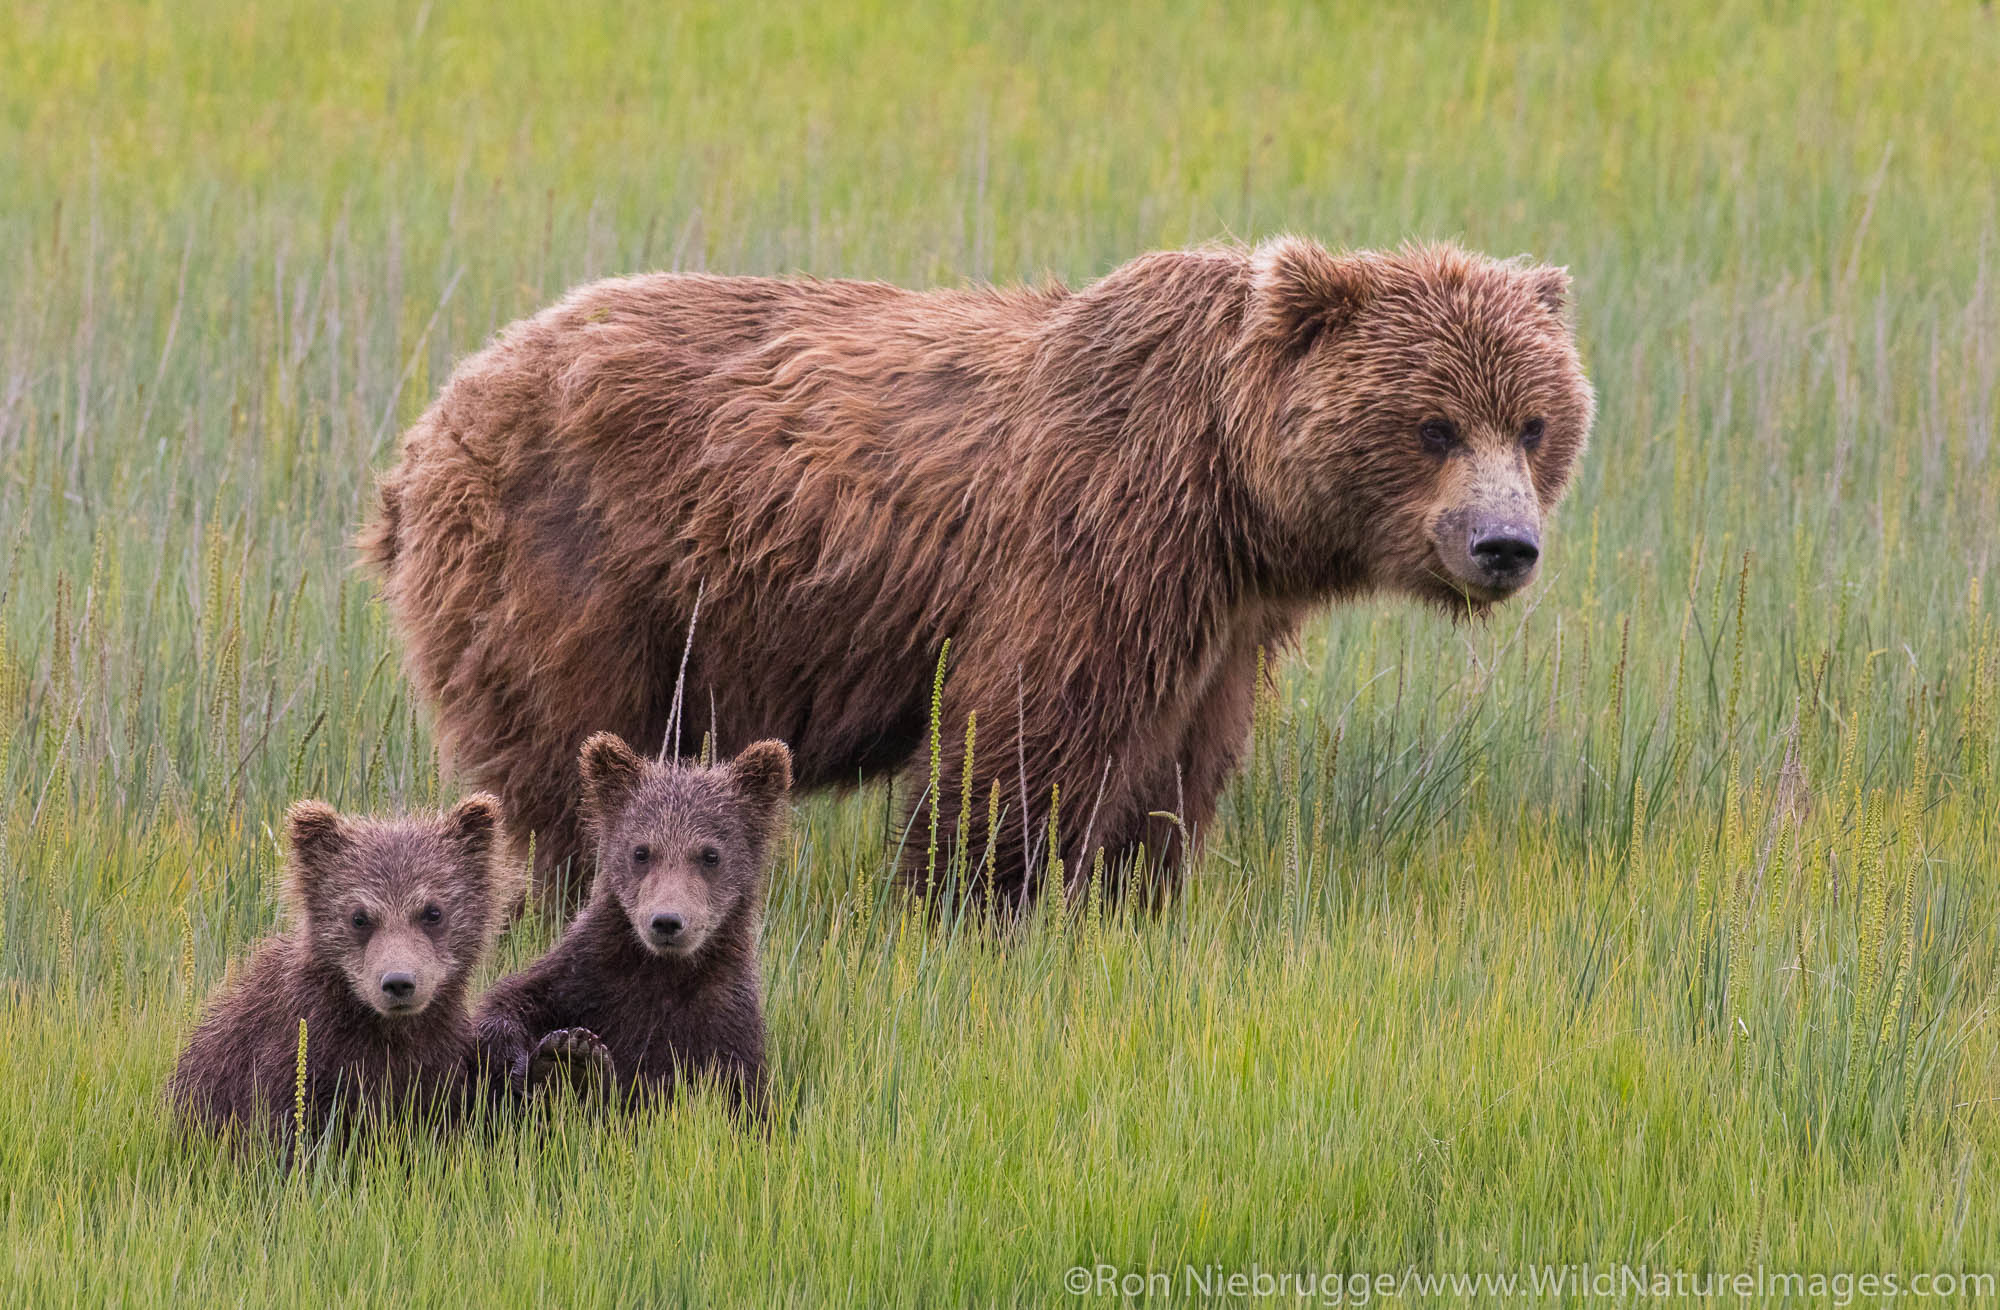 Grizzly Bear sow with cubs, Lake Clark National Park, Alaska